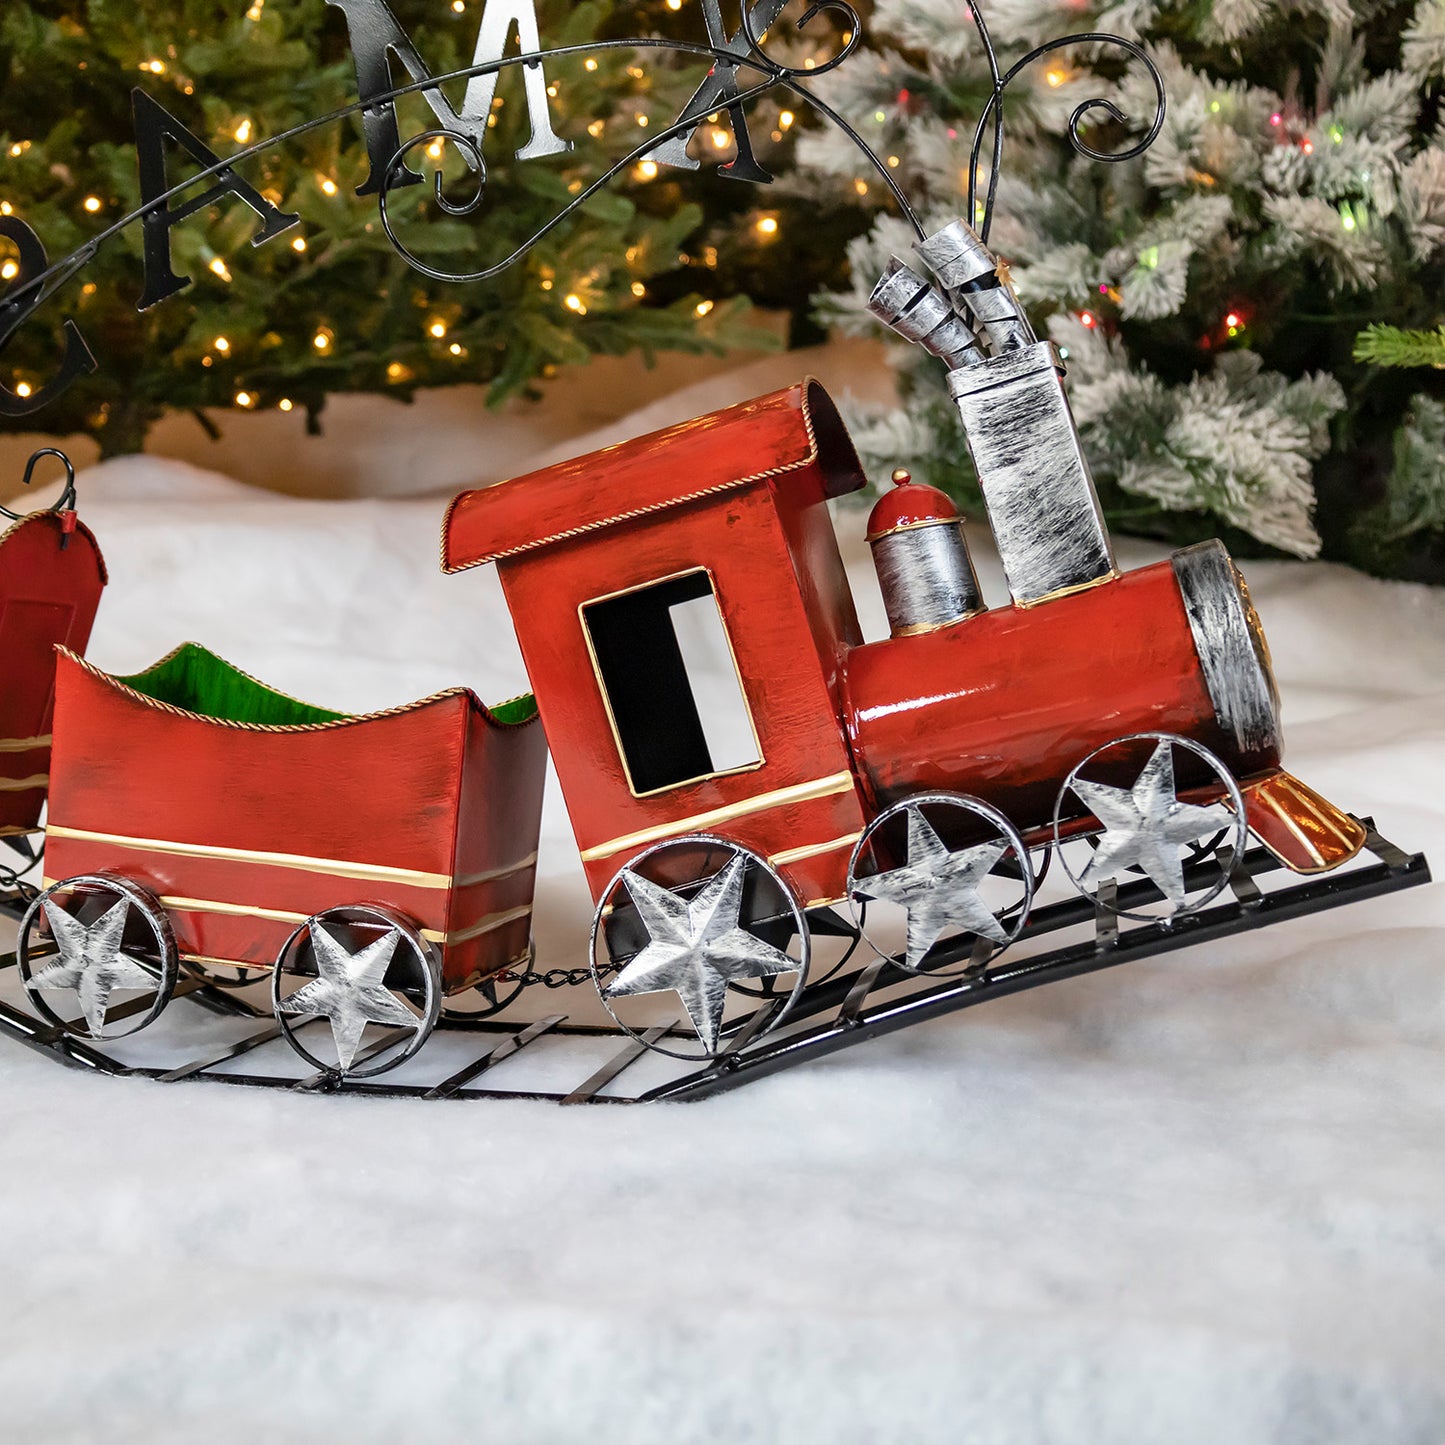 Metal Christmas Train on Track with 2 Carts